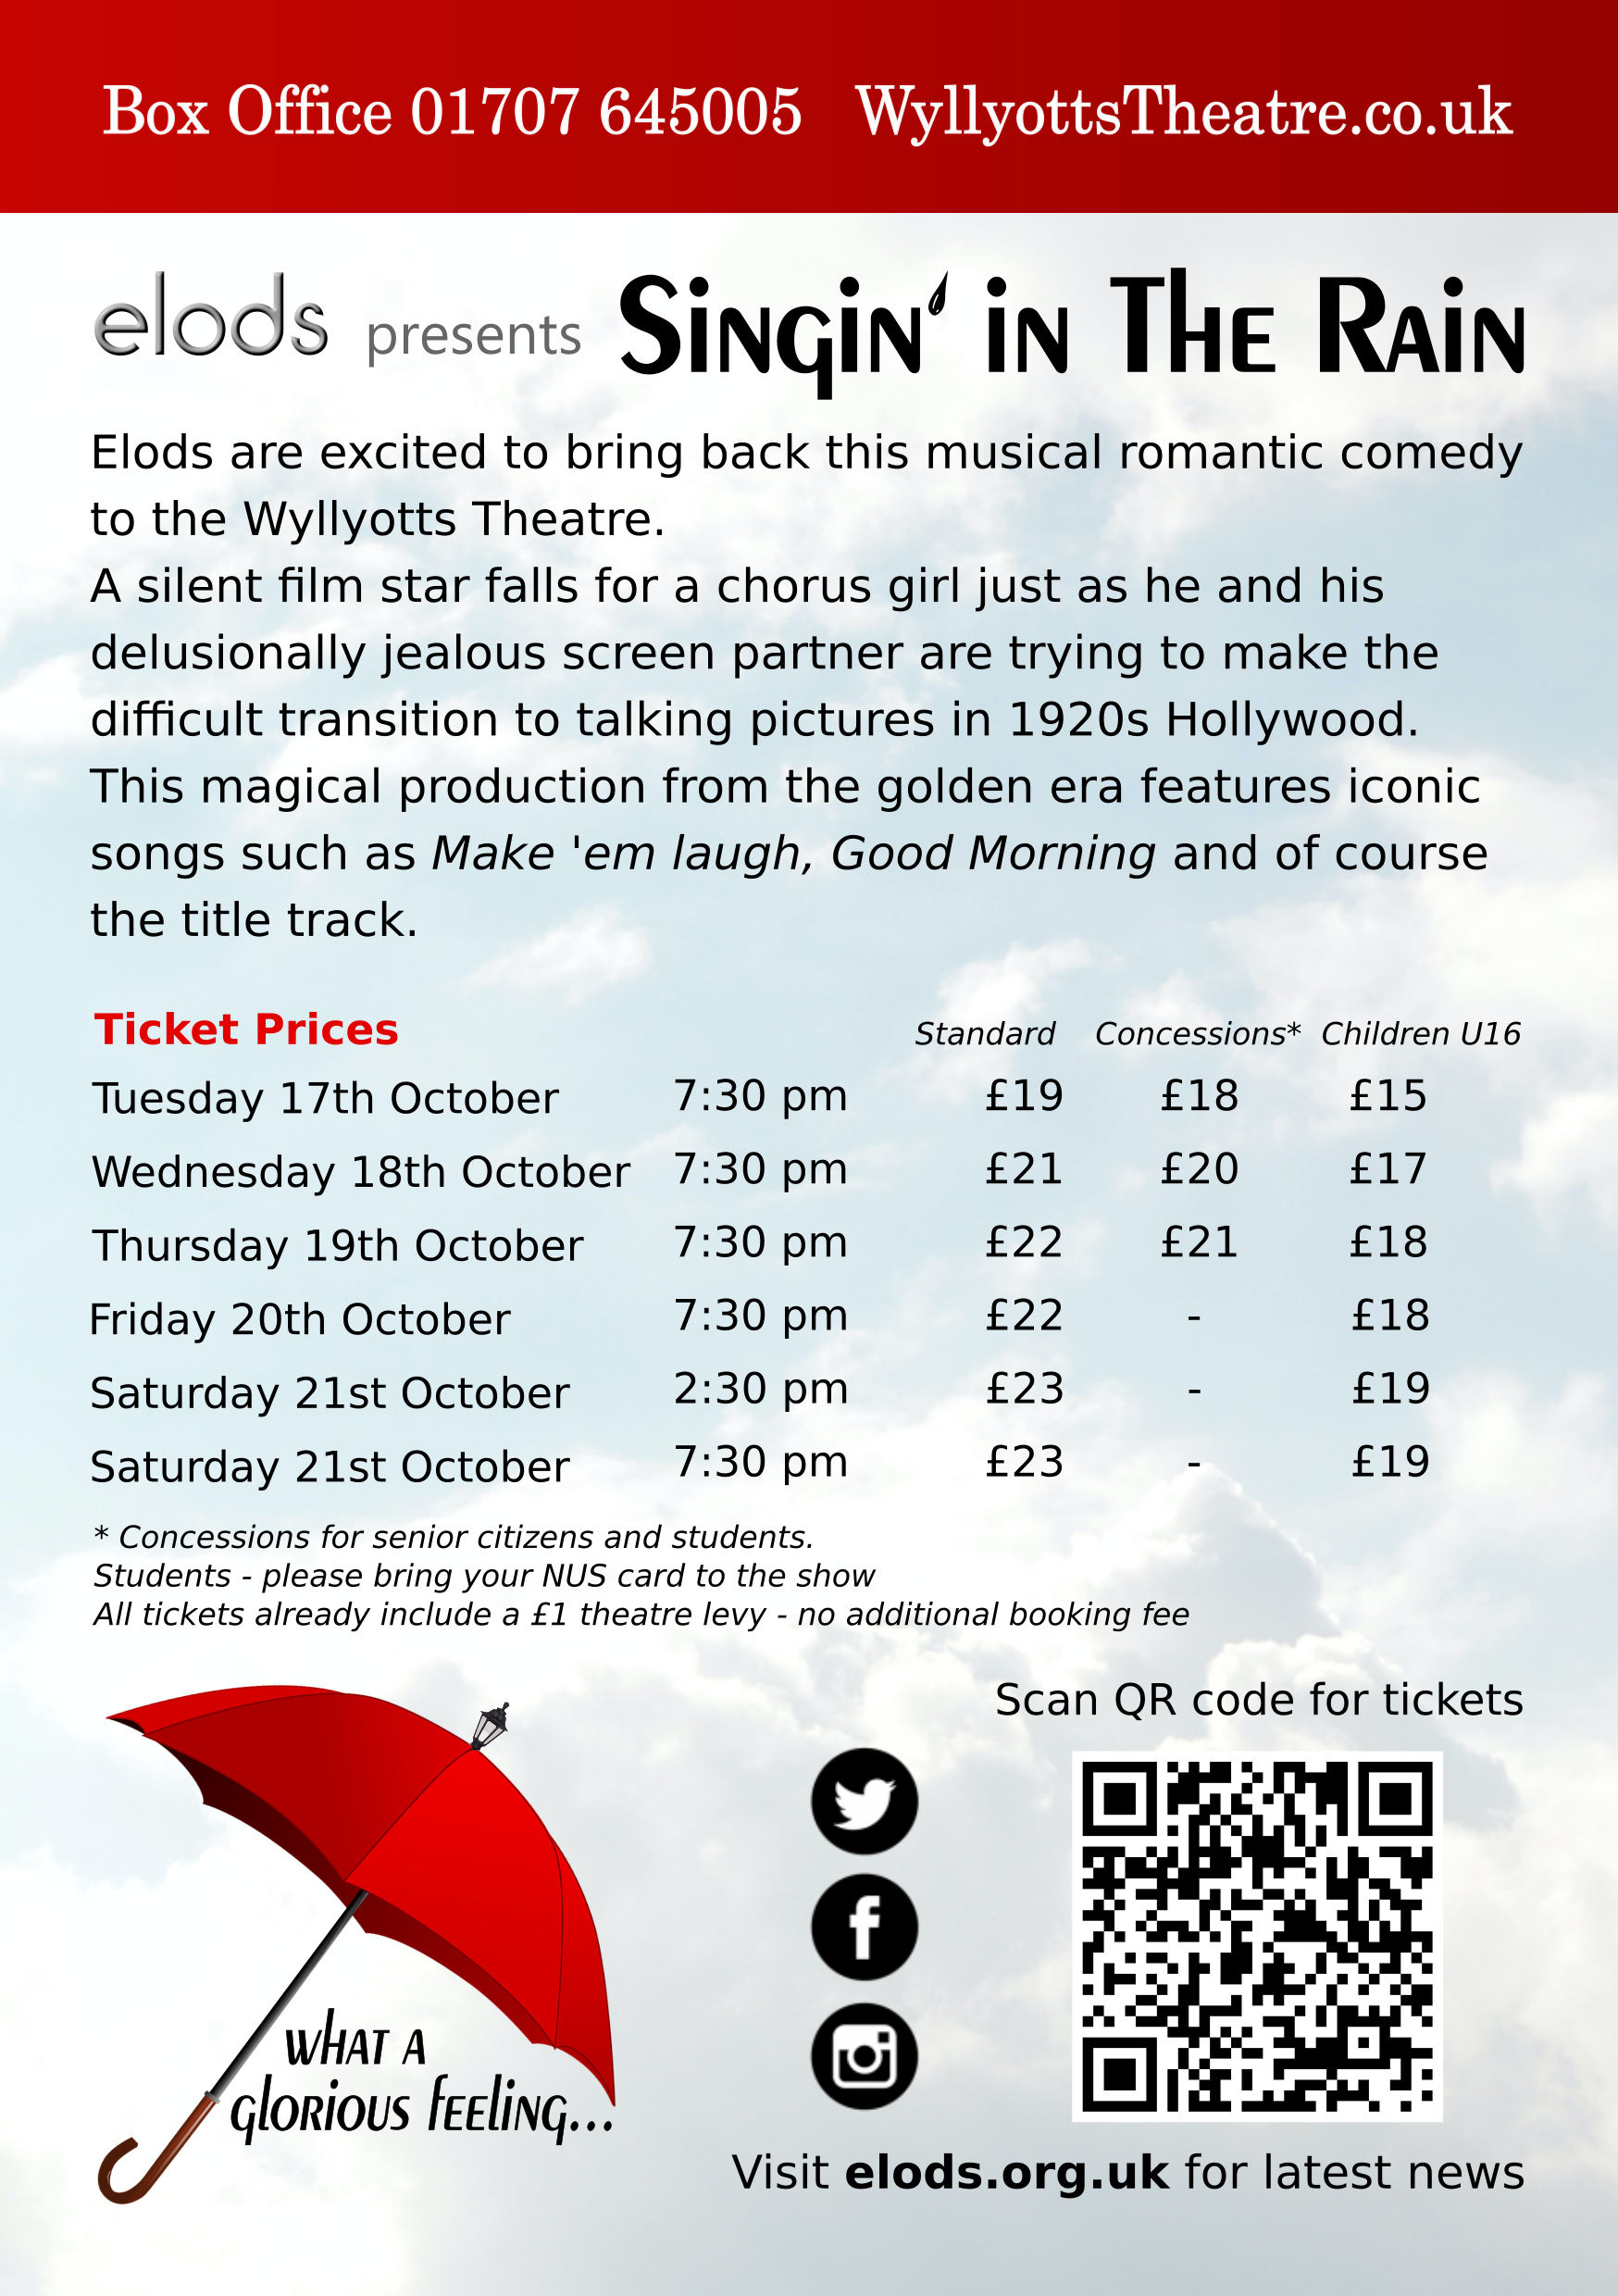 Singin' in the Rain- info and prices